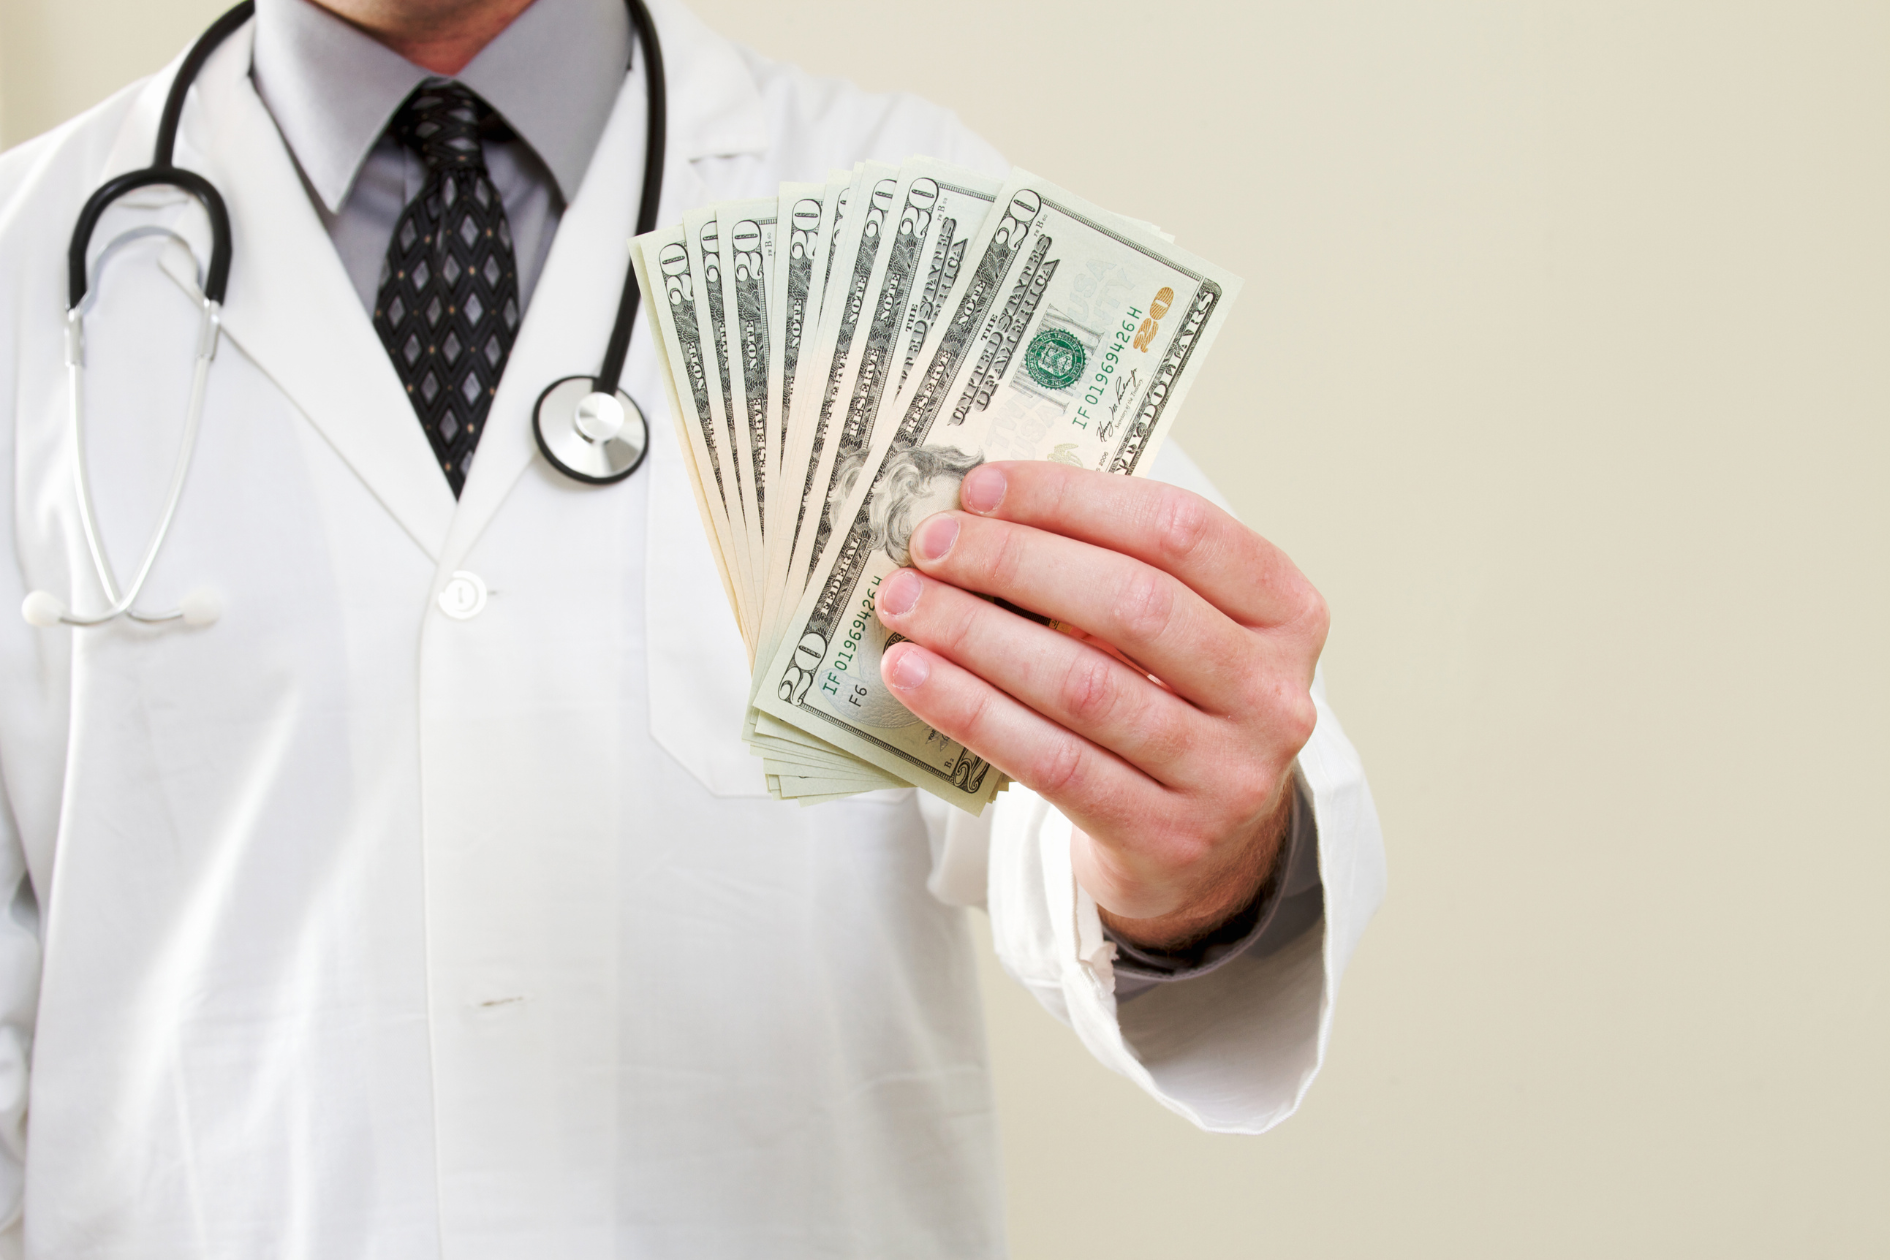 Why Do Locum Tenens Physicians Get Paid More?